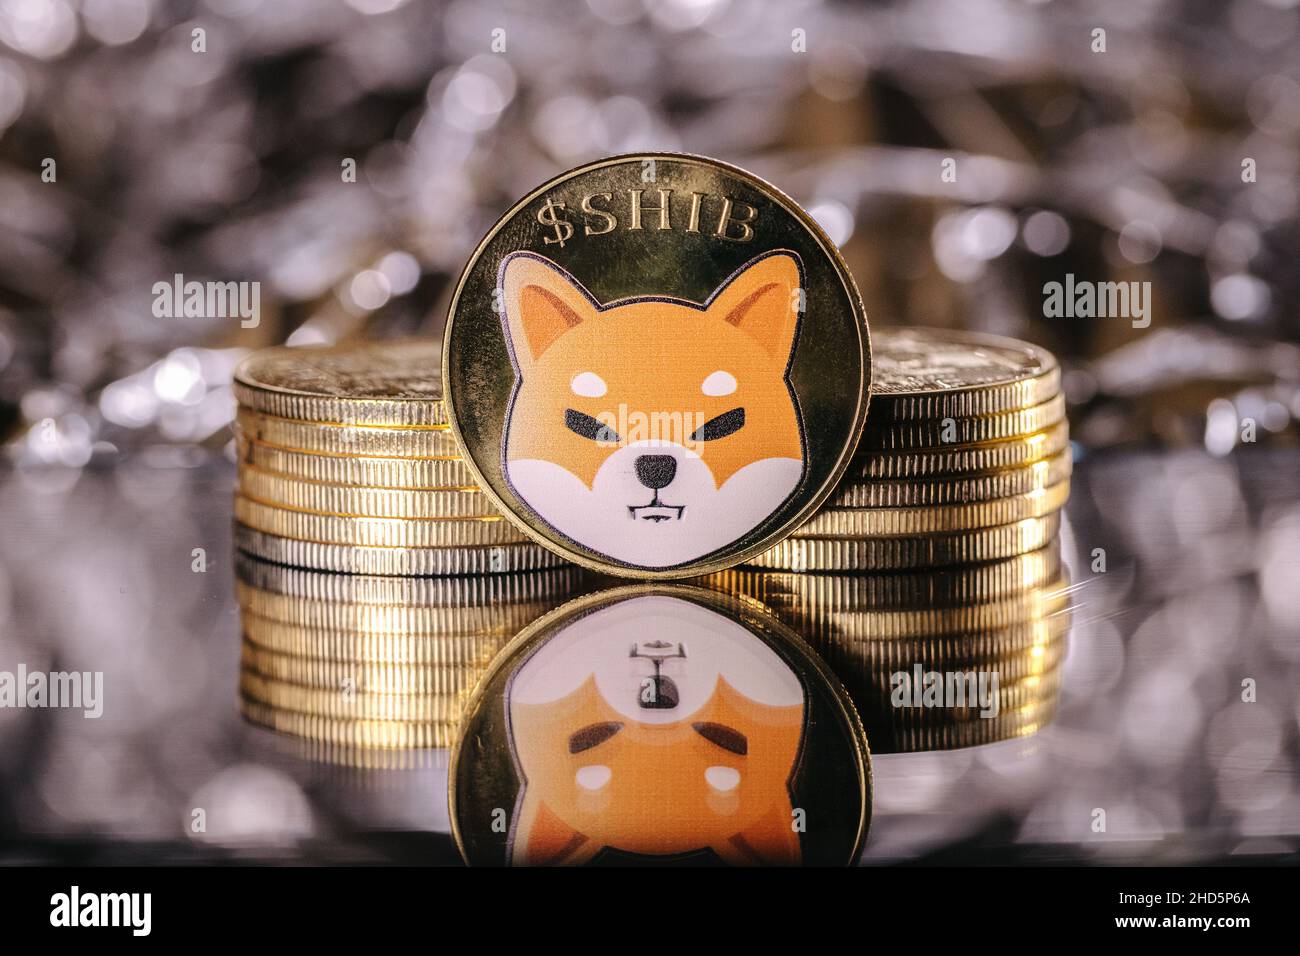 Shiba Inu cryptocurrency, physical coin in front of an abstract background Stock Photo